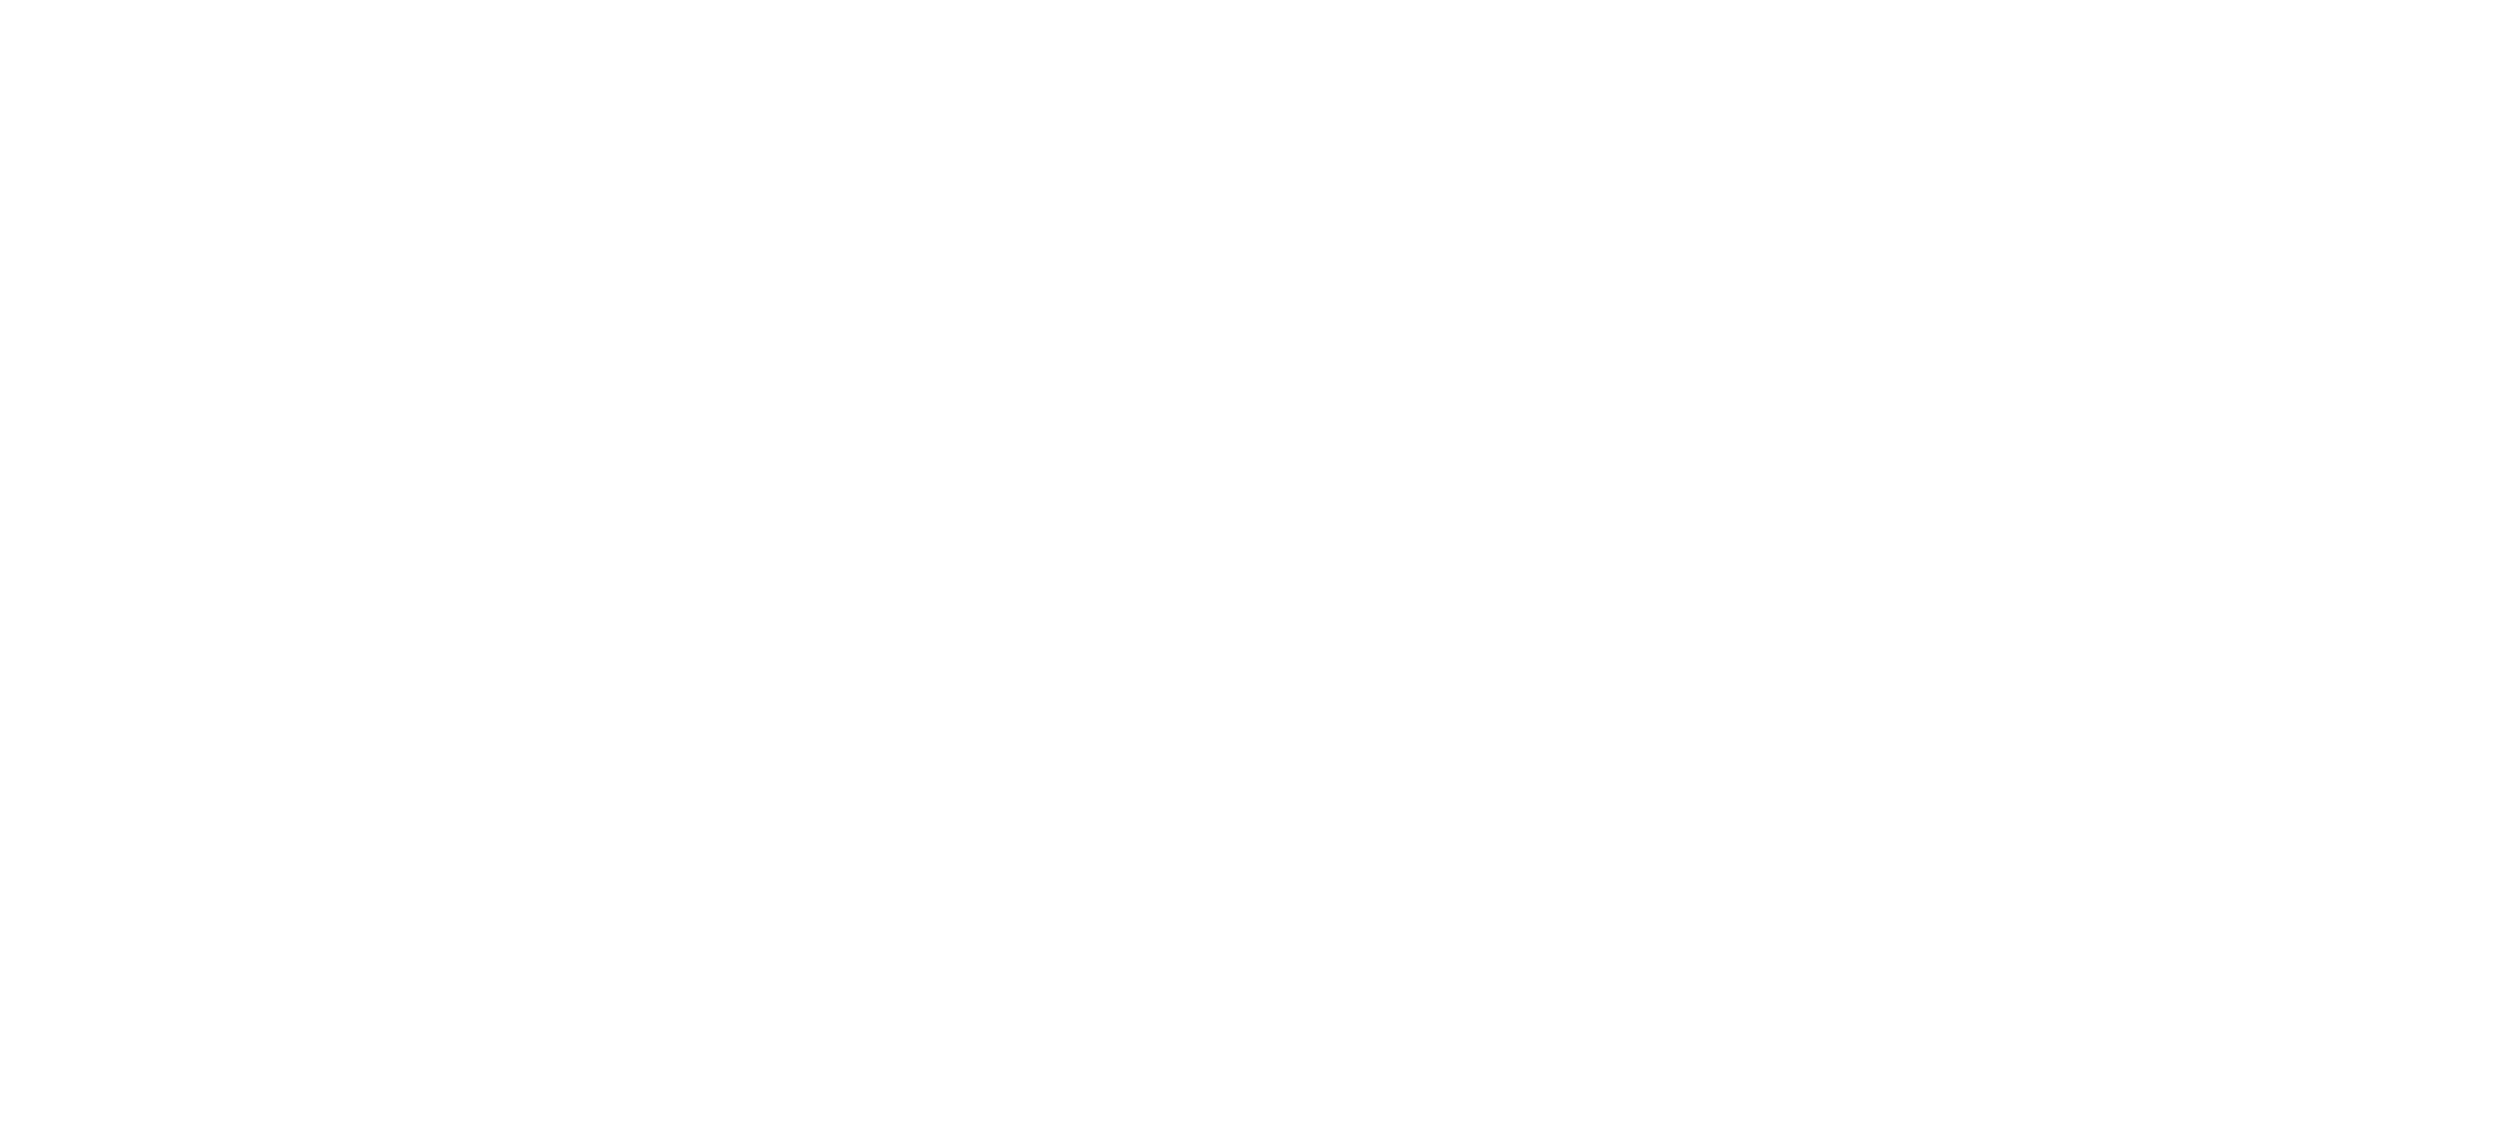 Tedx.png